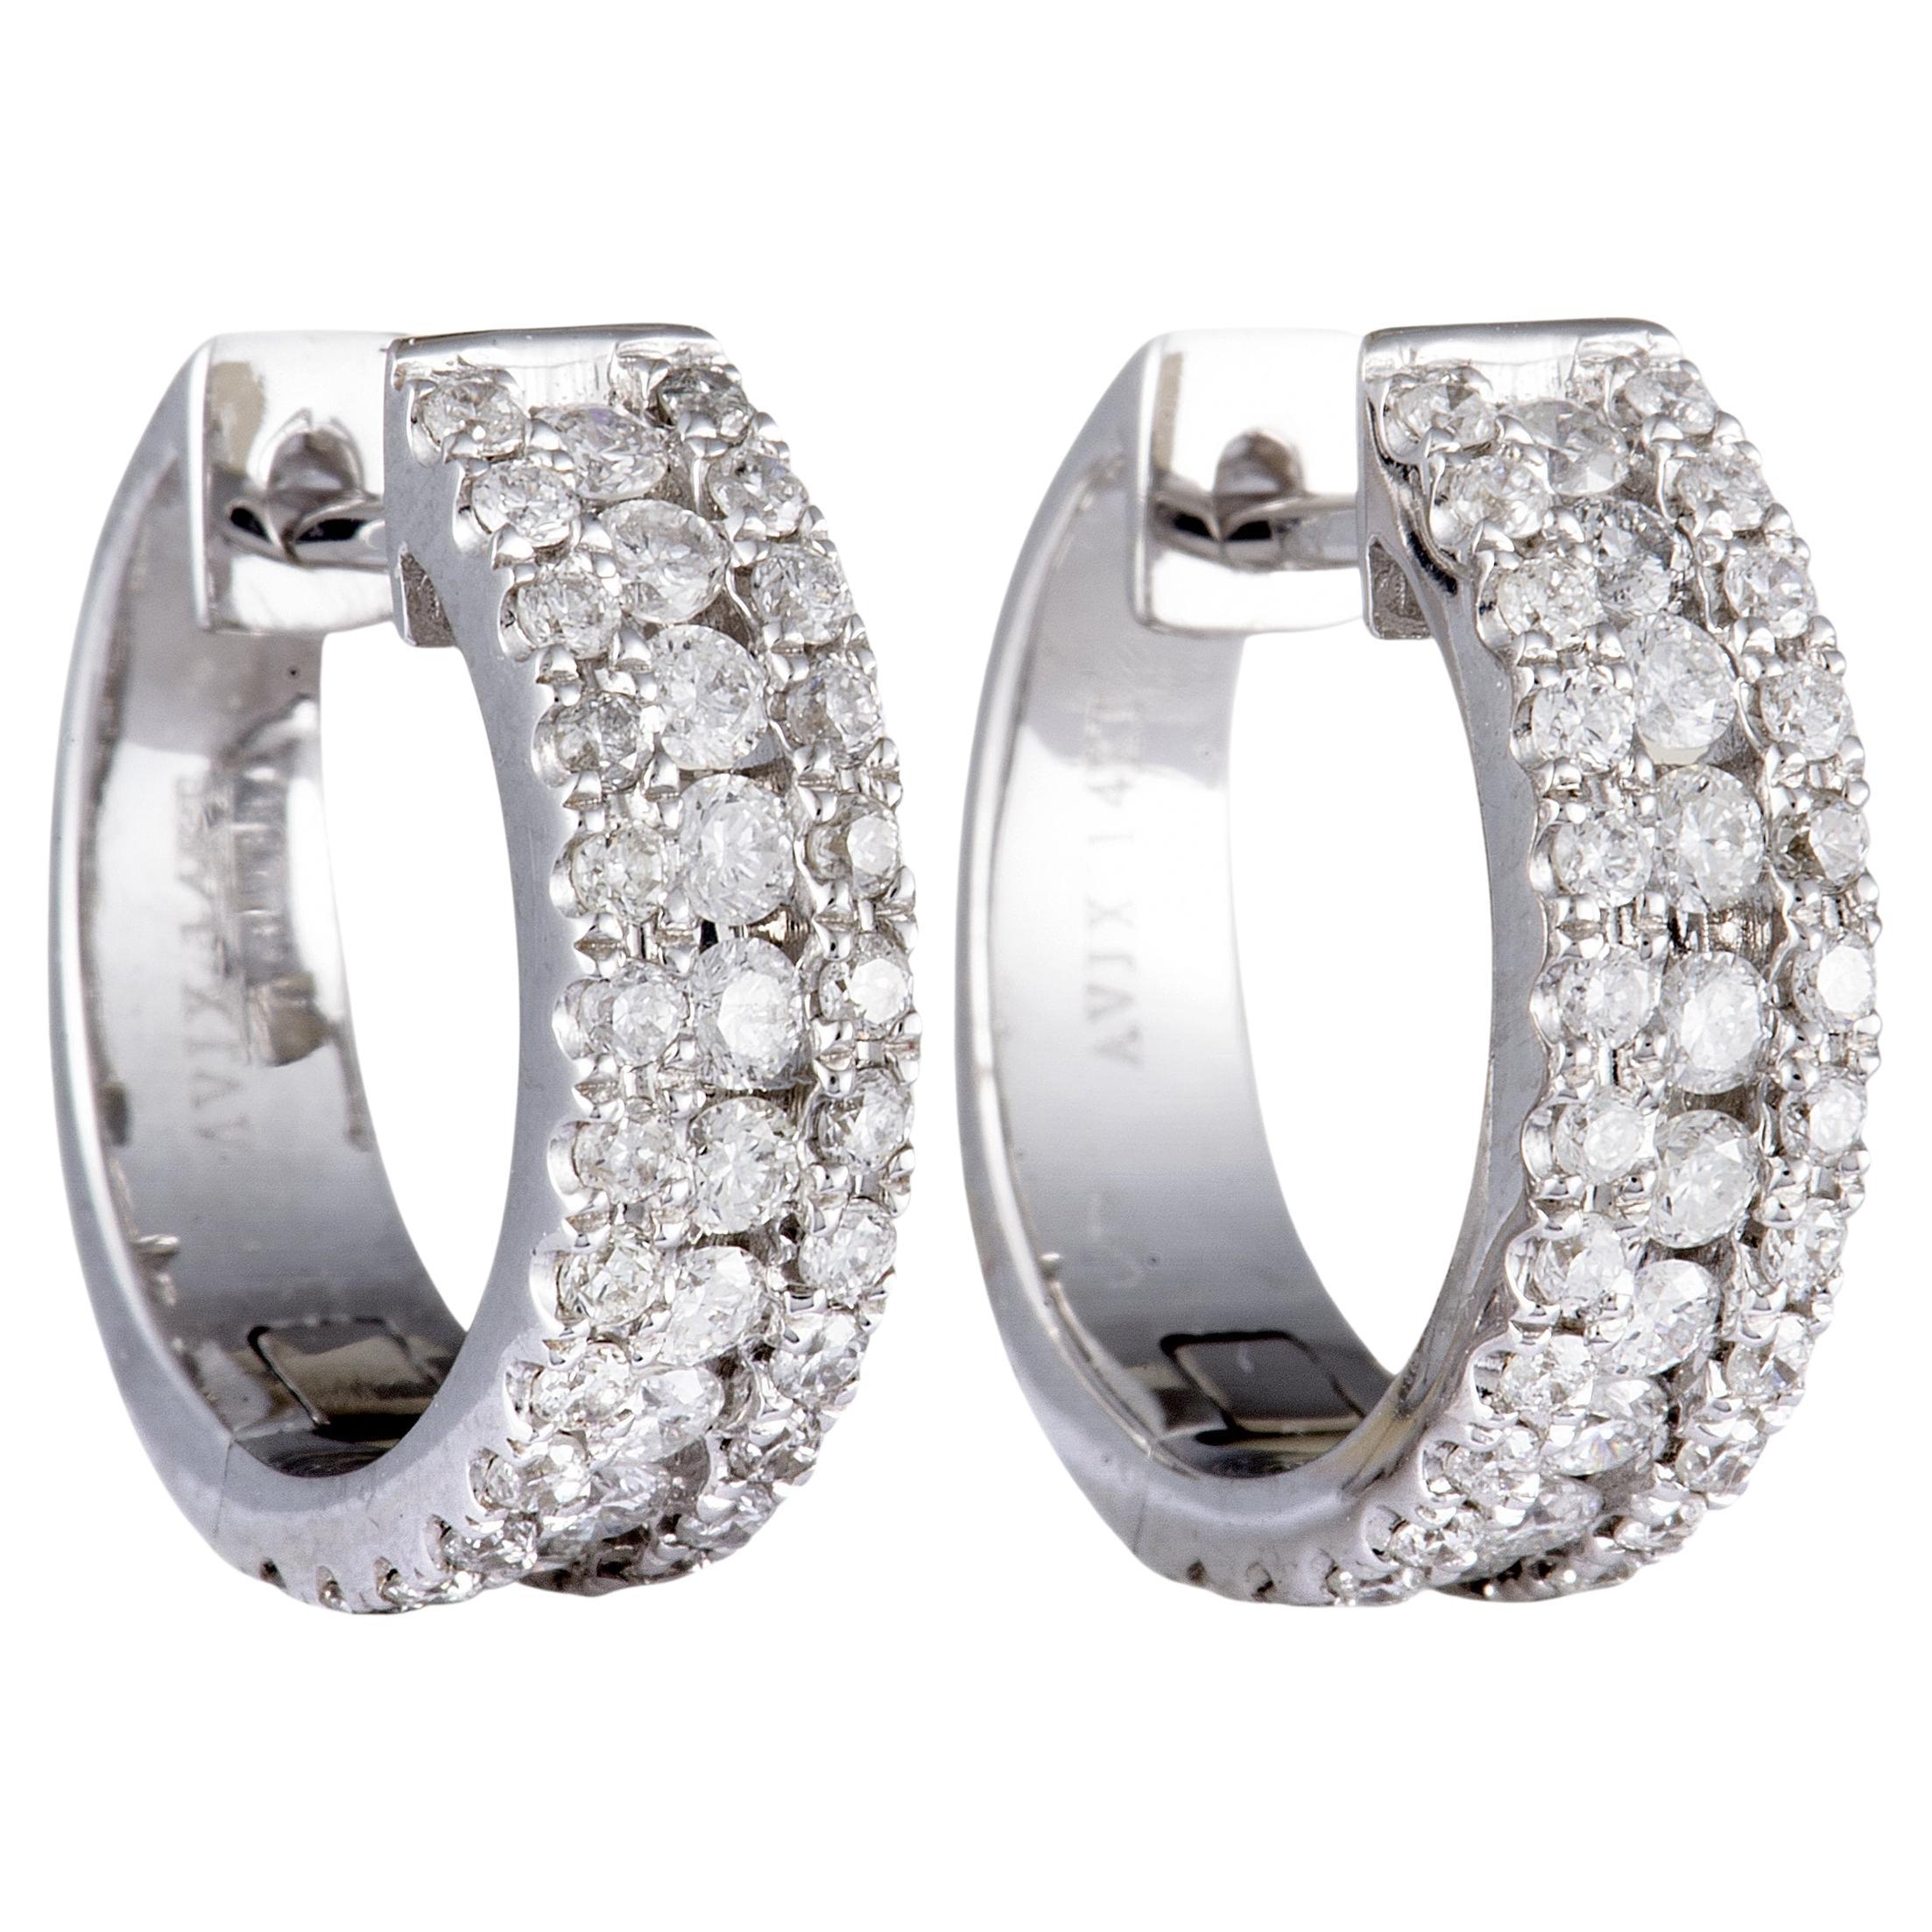 LB Exclusive 14K White Gold 1.00 ct Diamond Hoop Earrings For Sale